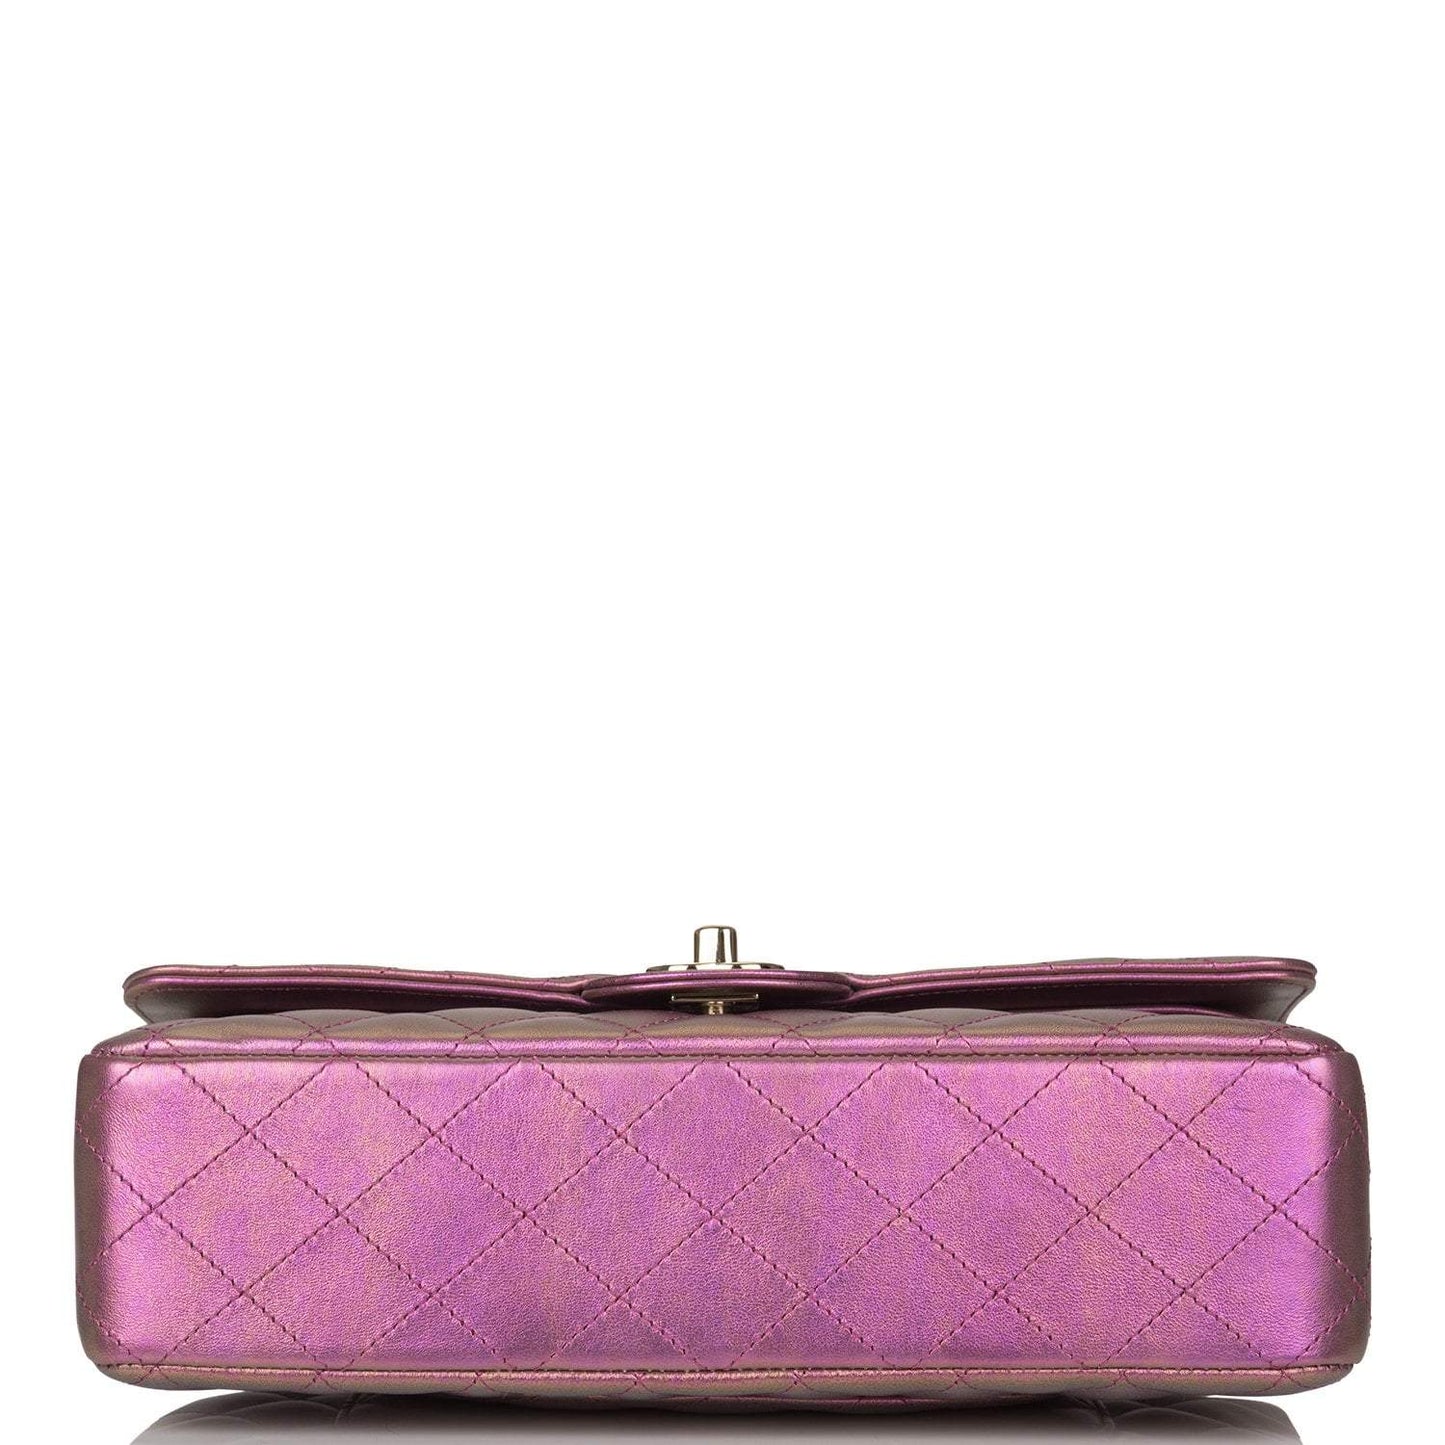 Chanel Purple Iridescent Quilted Lambskin Medium Classic Double Flap Bag Light Gold Hardware